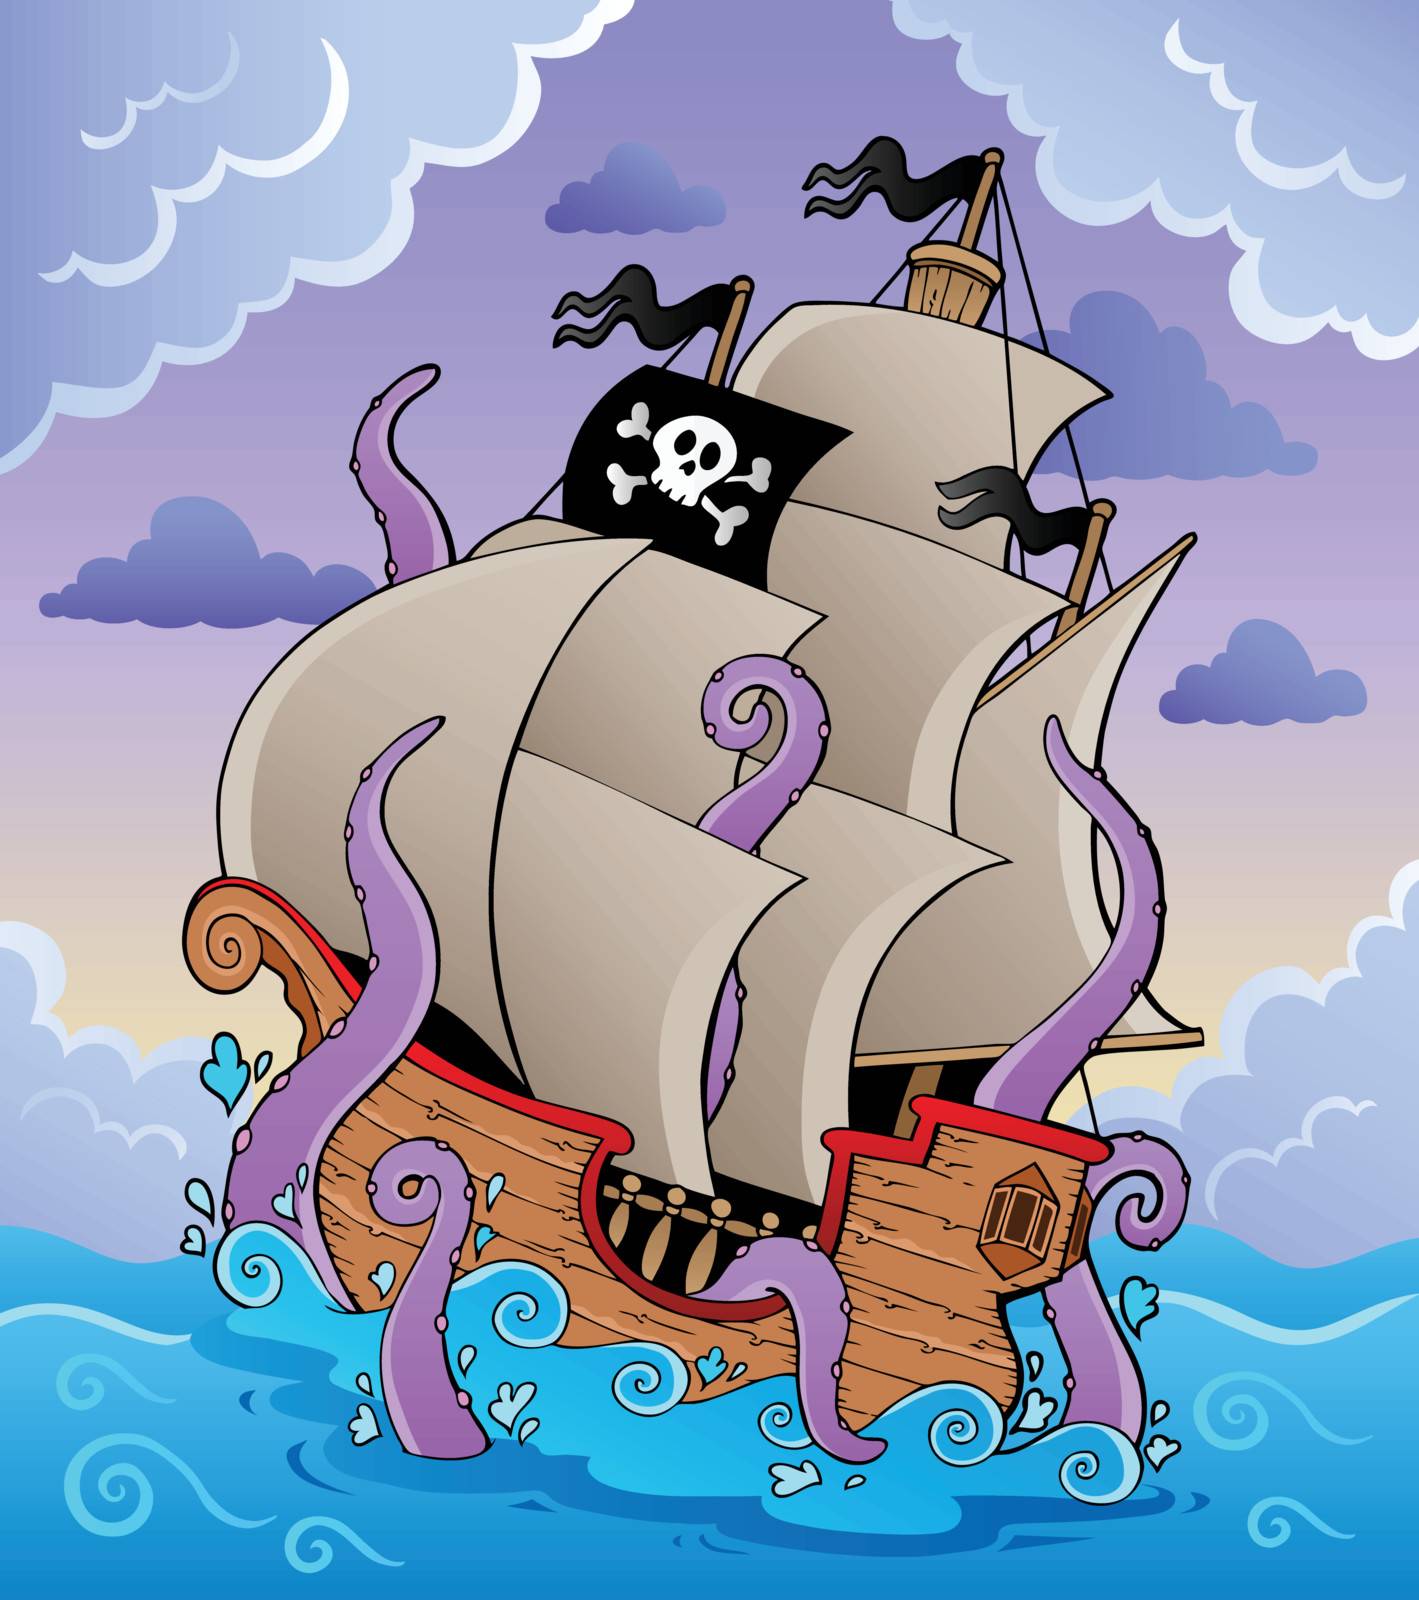 Pirate ship with tentacles in storm by clairev